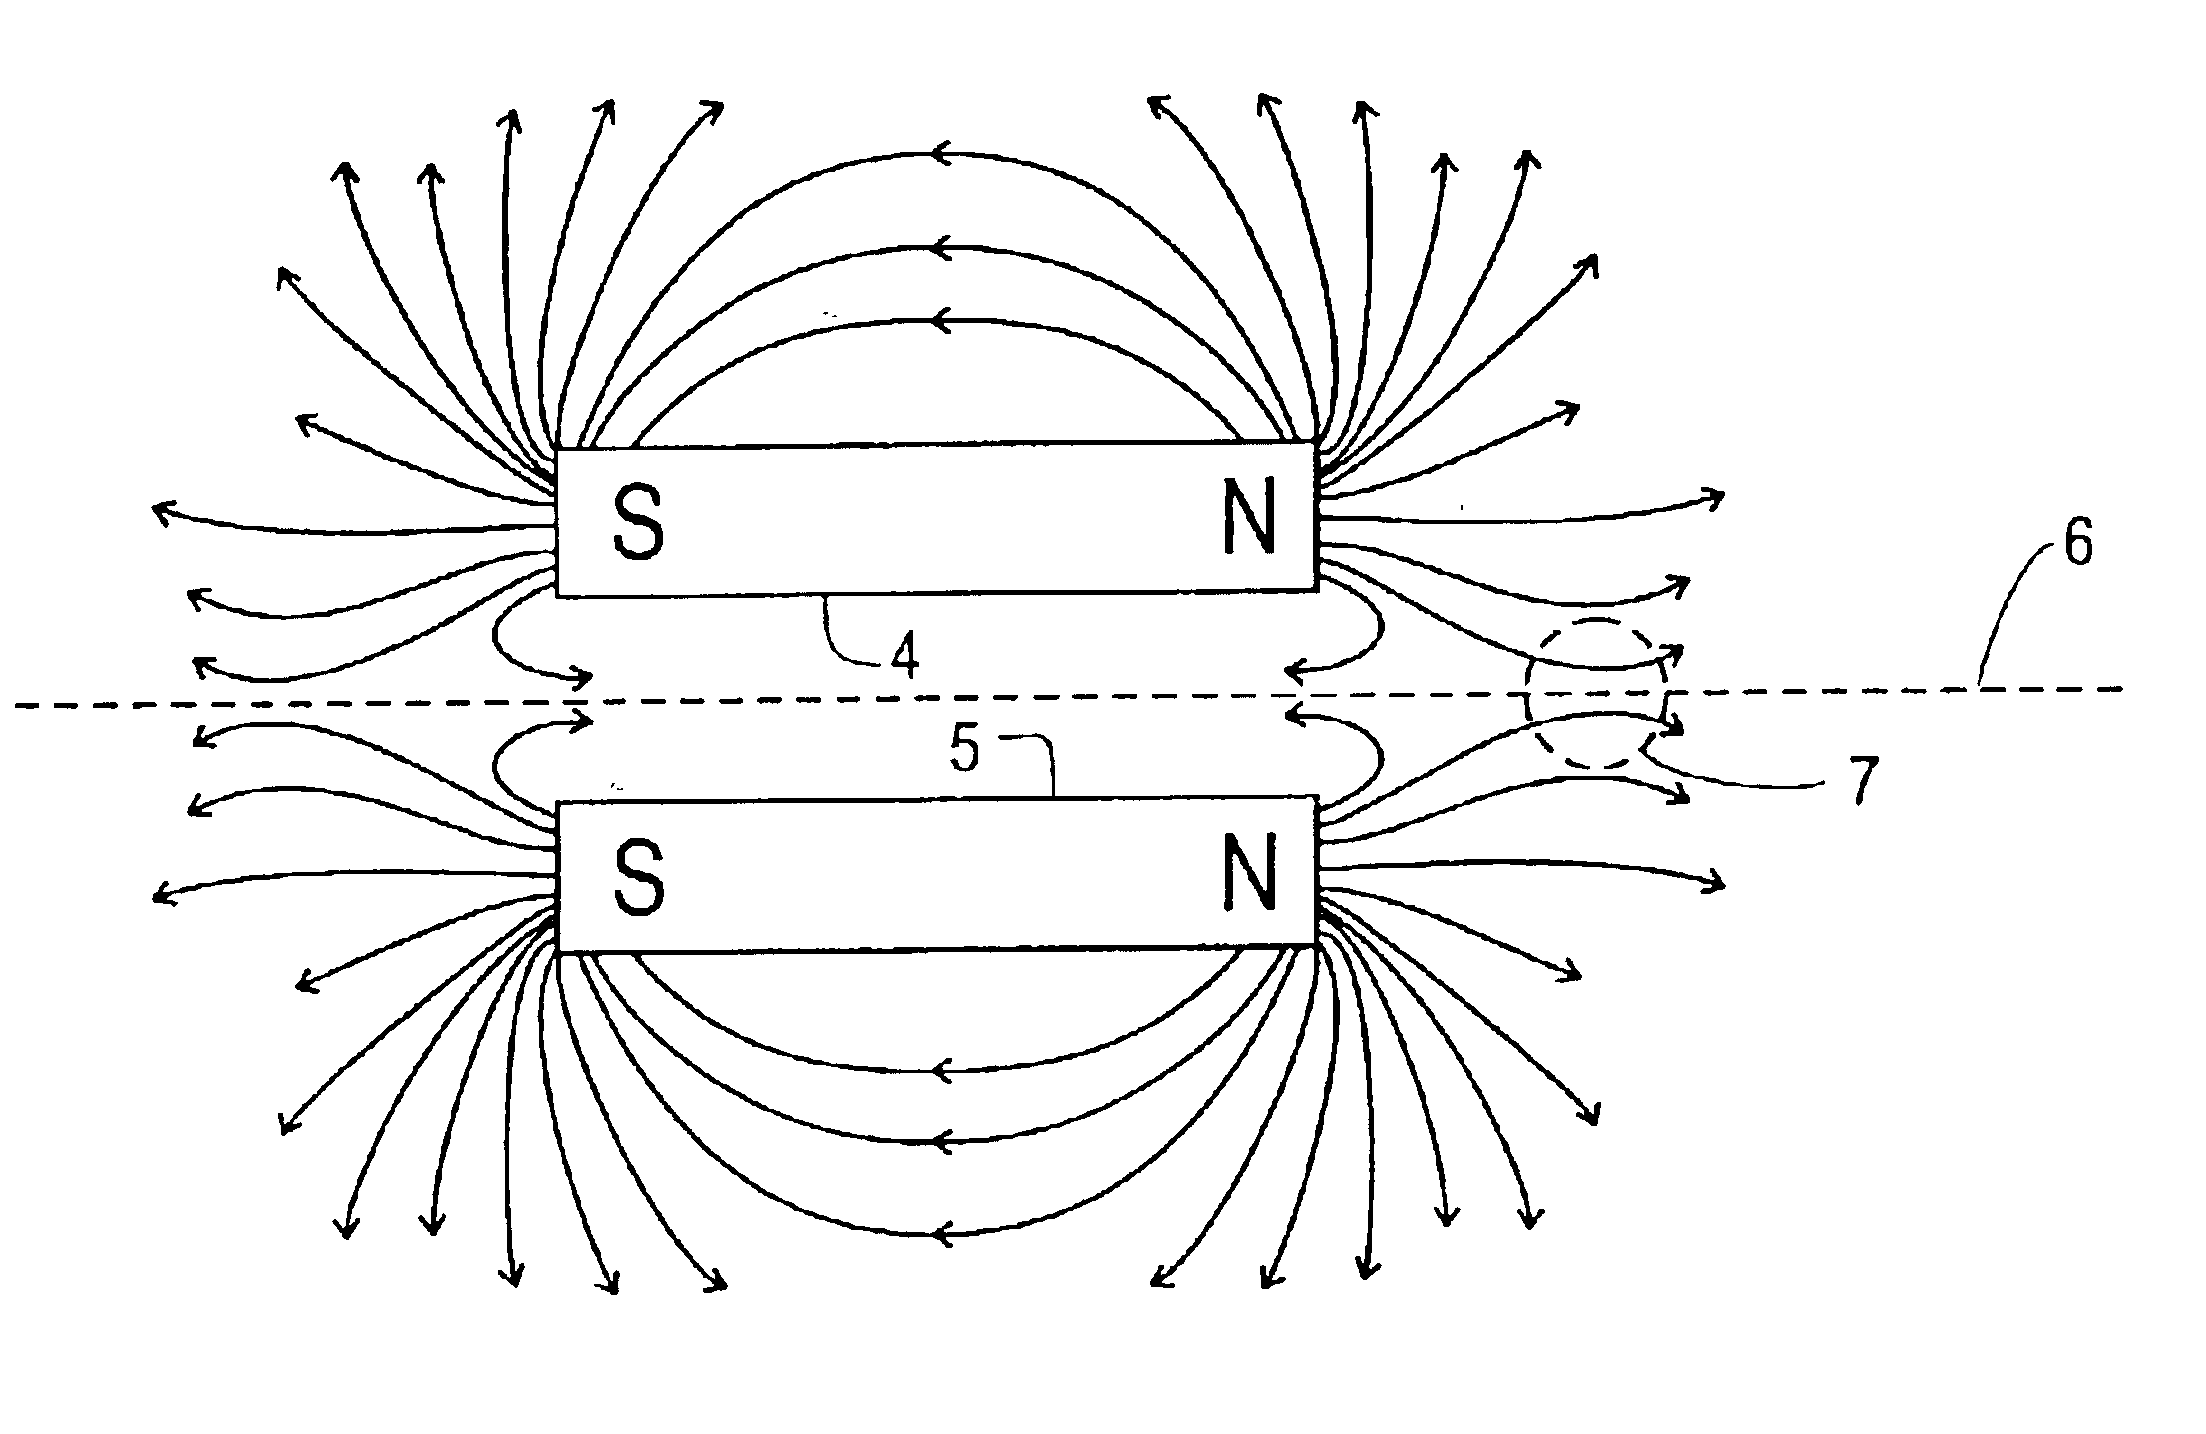 Unilateral magnet having a remote uniform field region for nuclear magnetic resonance